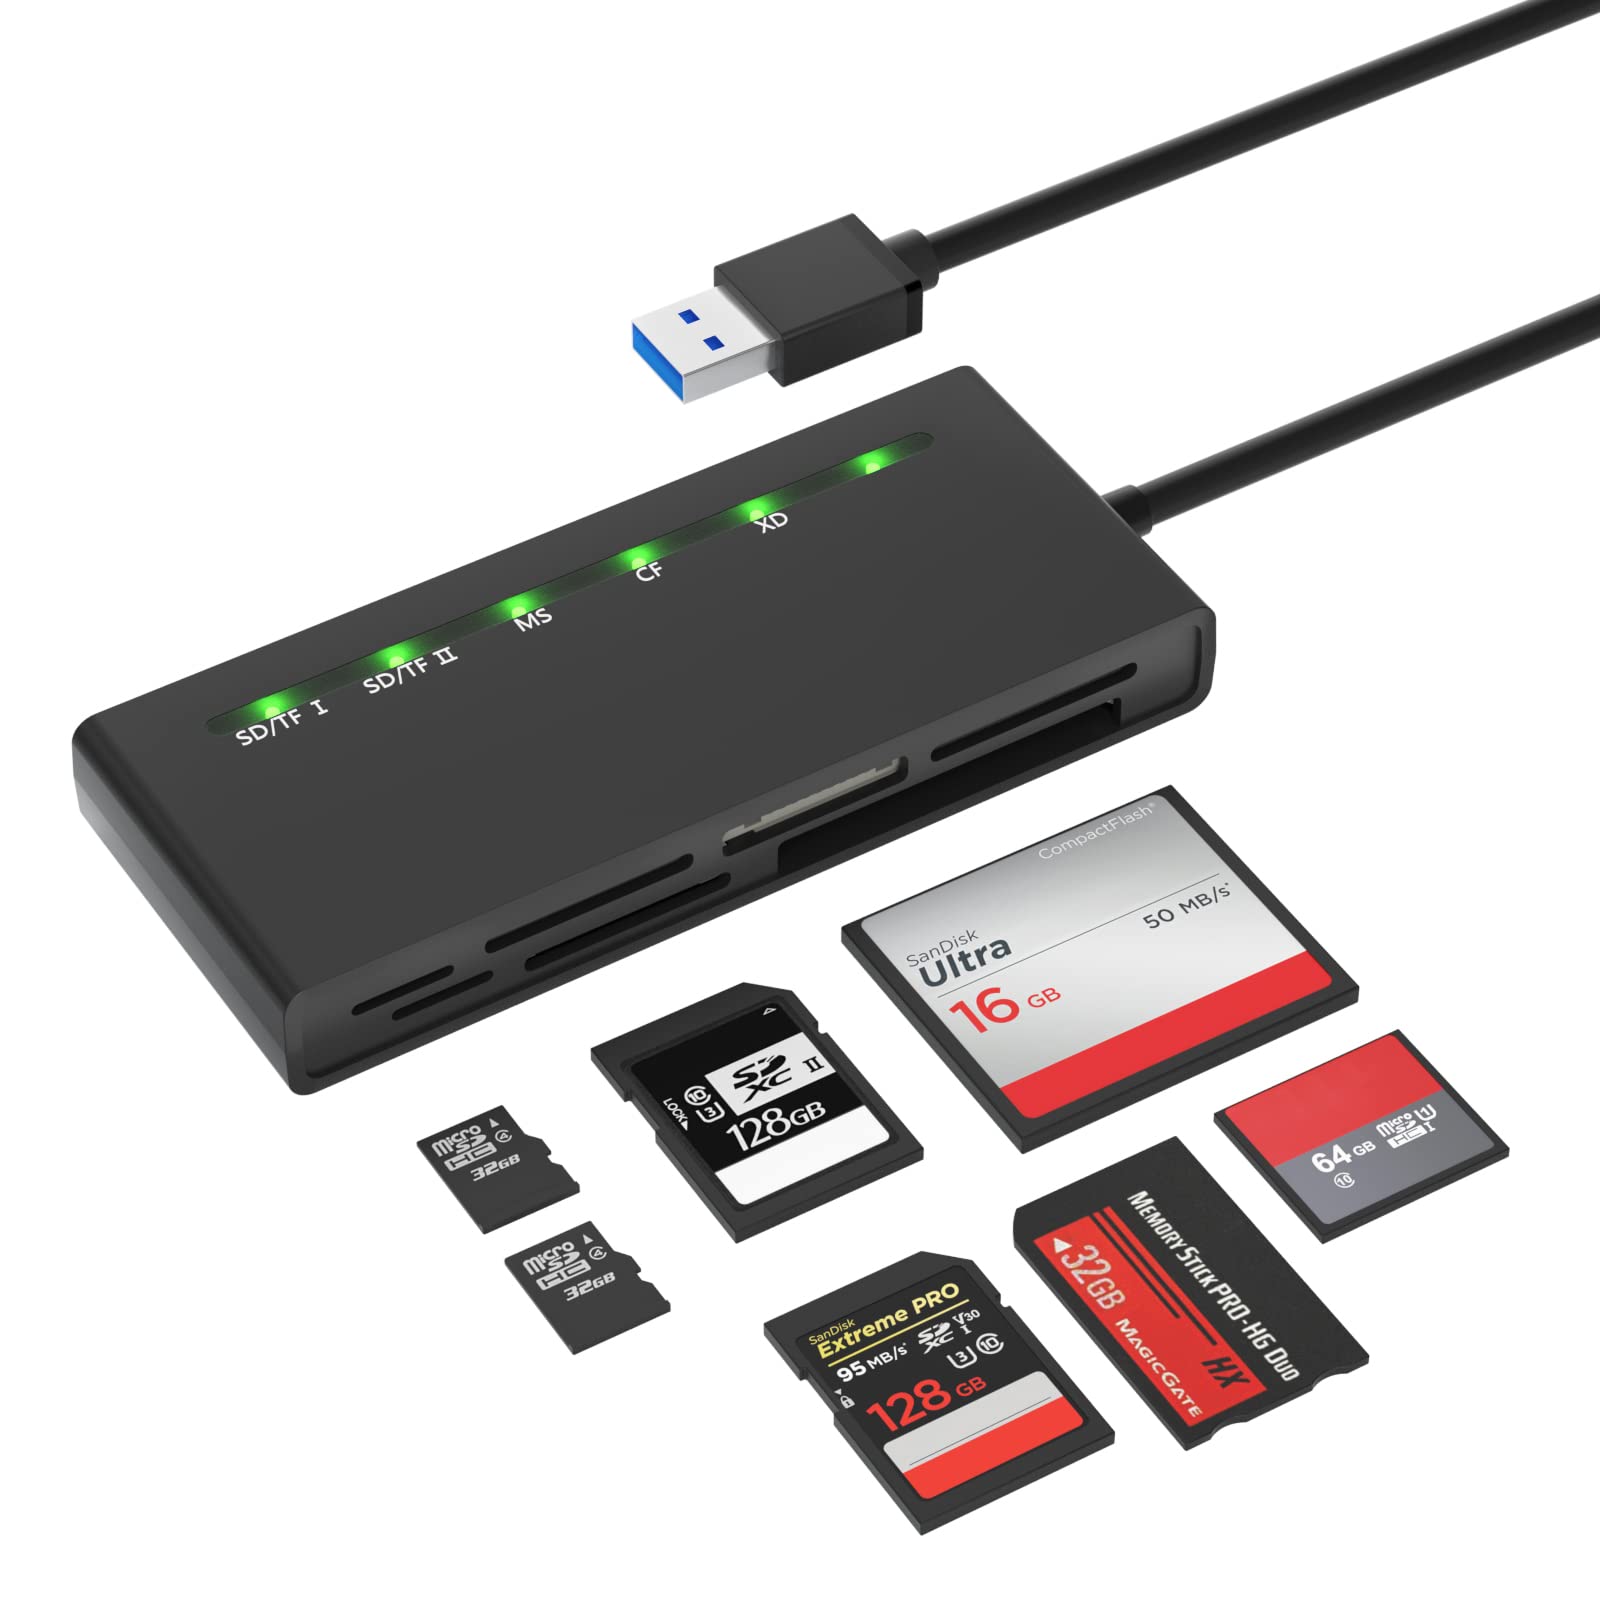 USB 3.0 カードリーダー7 in 1 SD/Micro SD/